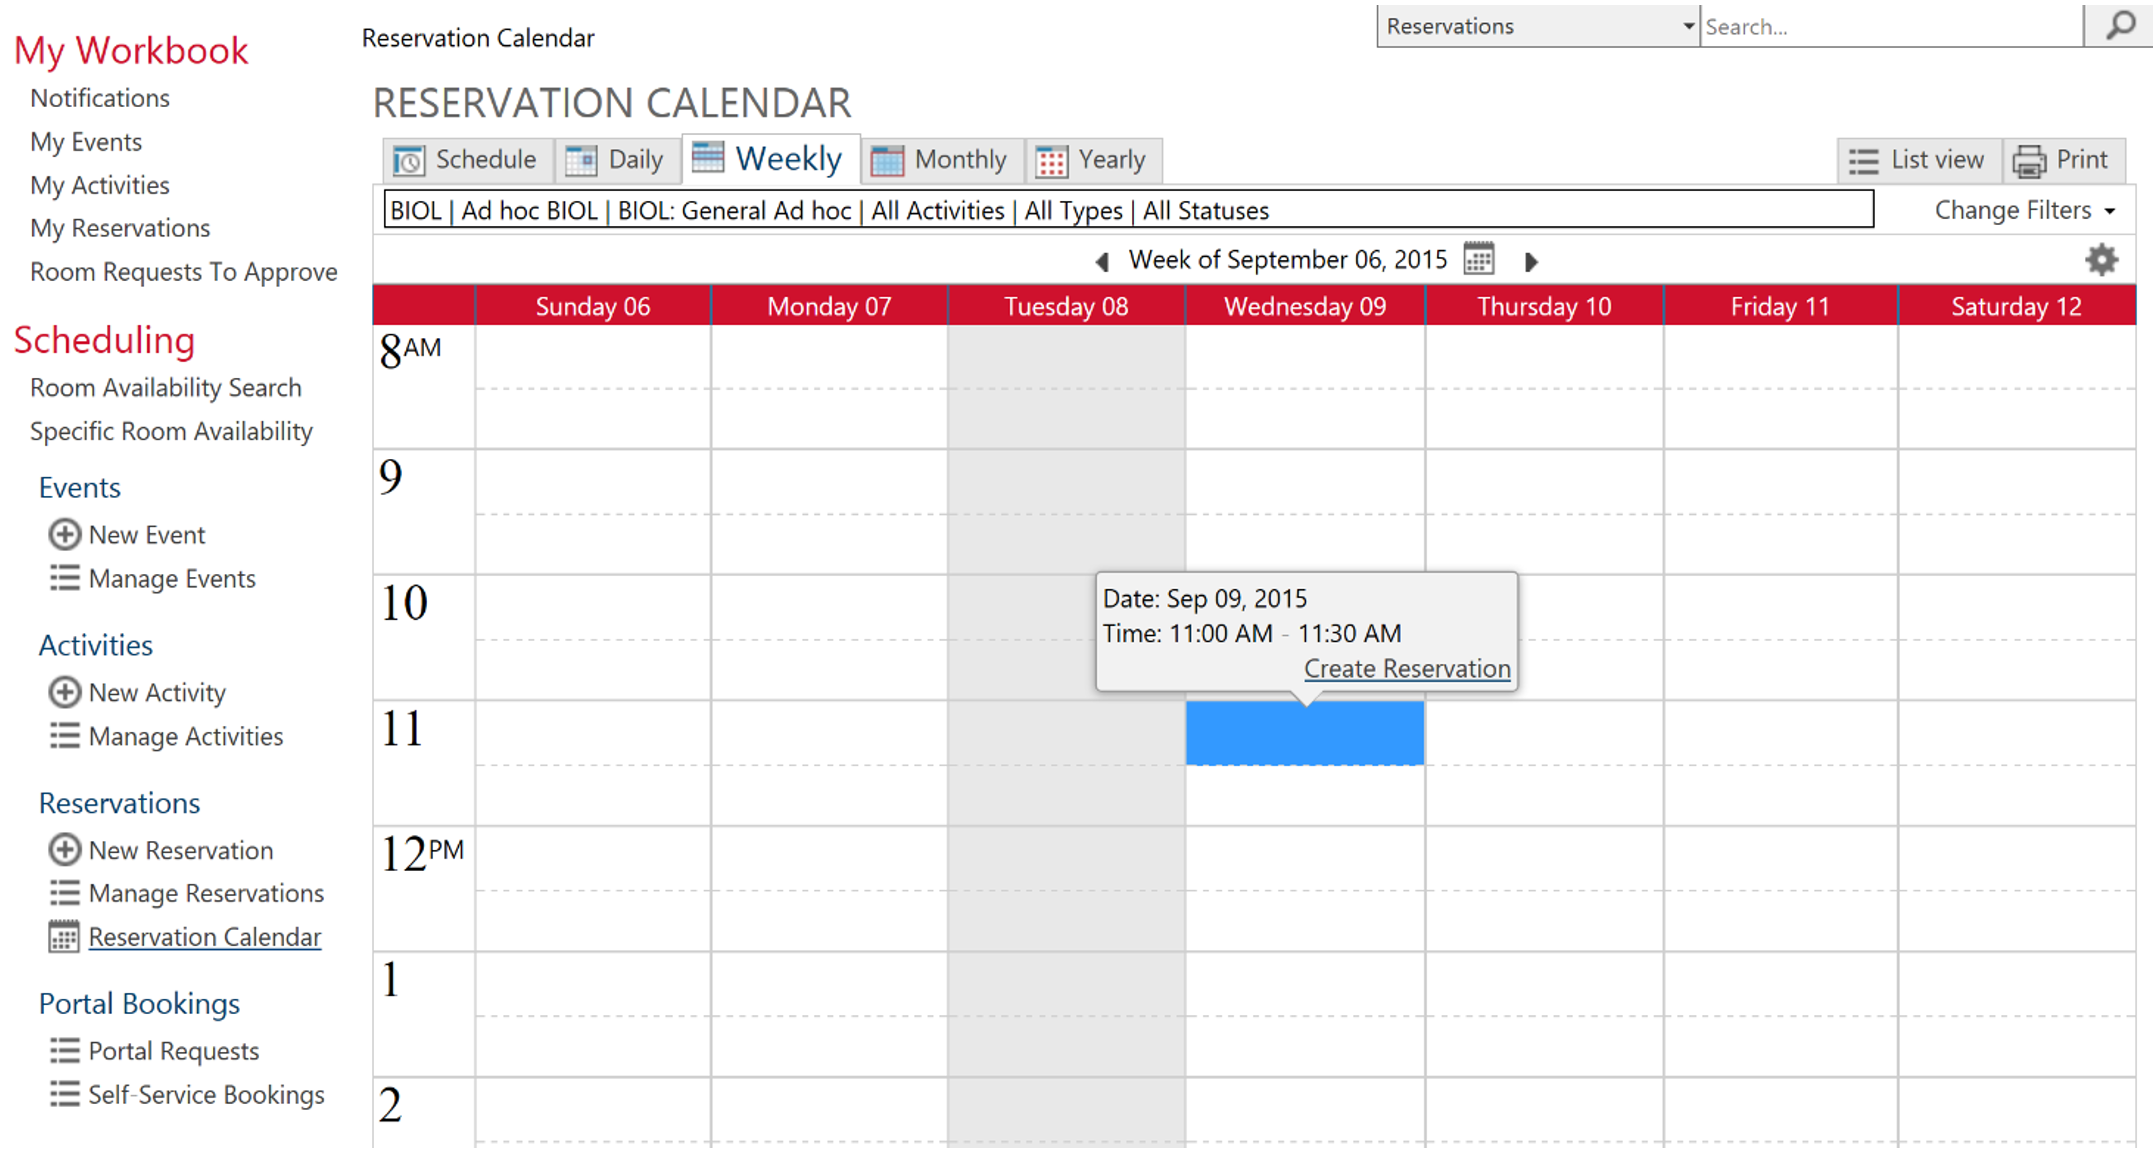 7) Using the Reservation Calendar Scheduling and Examination Services